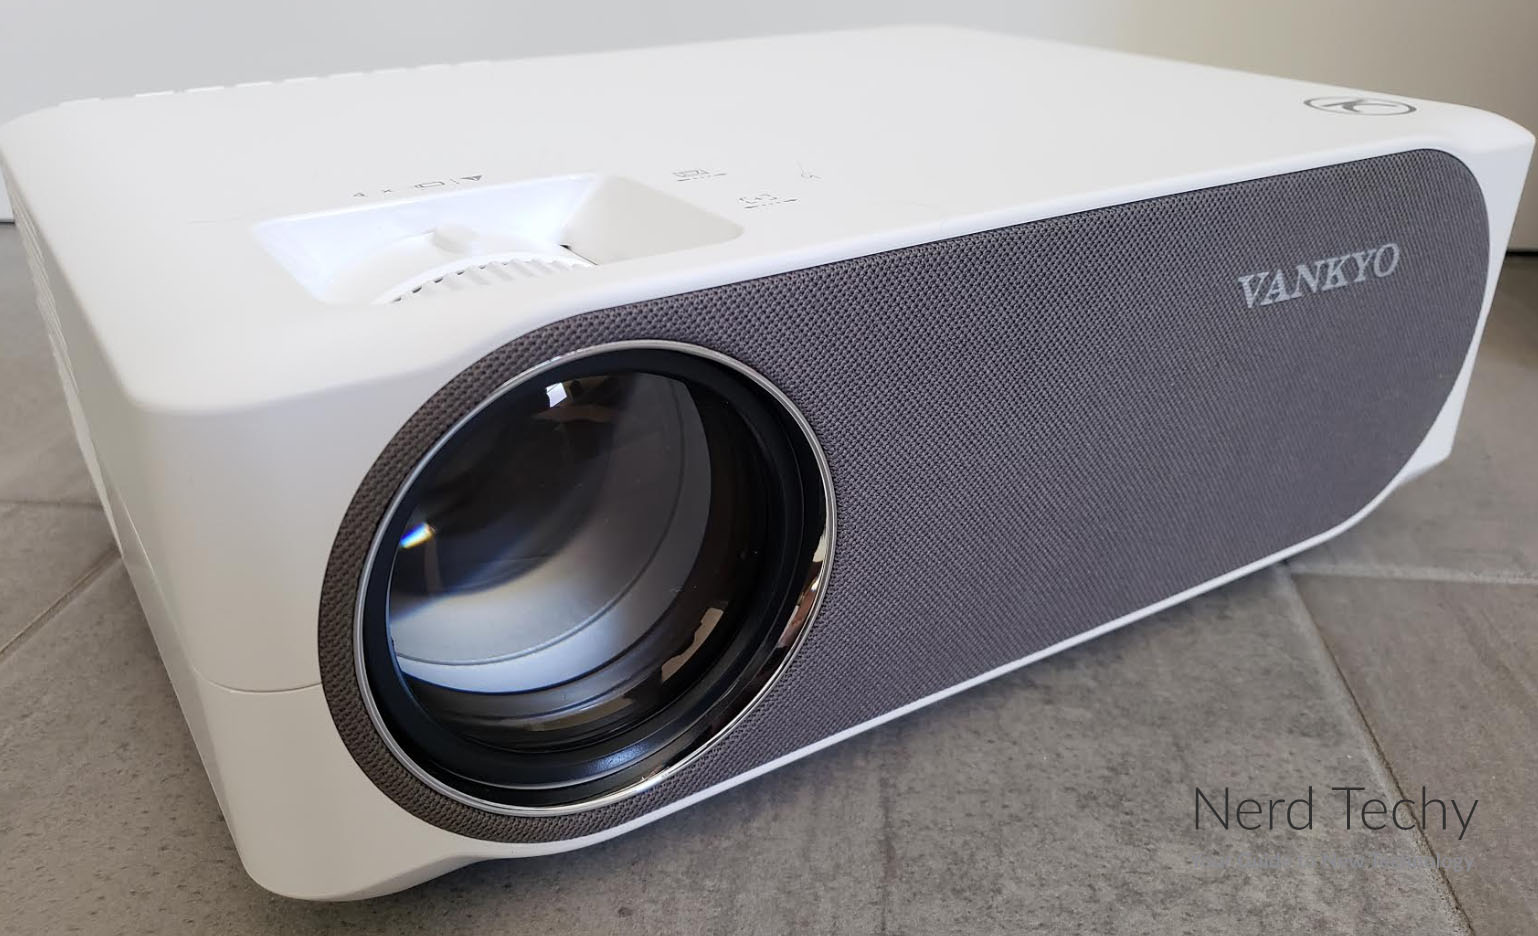 Review of the VANKYO Performance V630 Full HD Projector - Nerd Techy